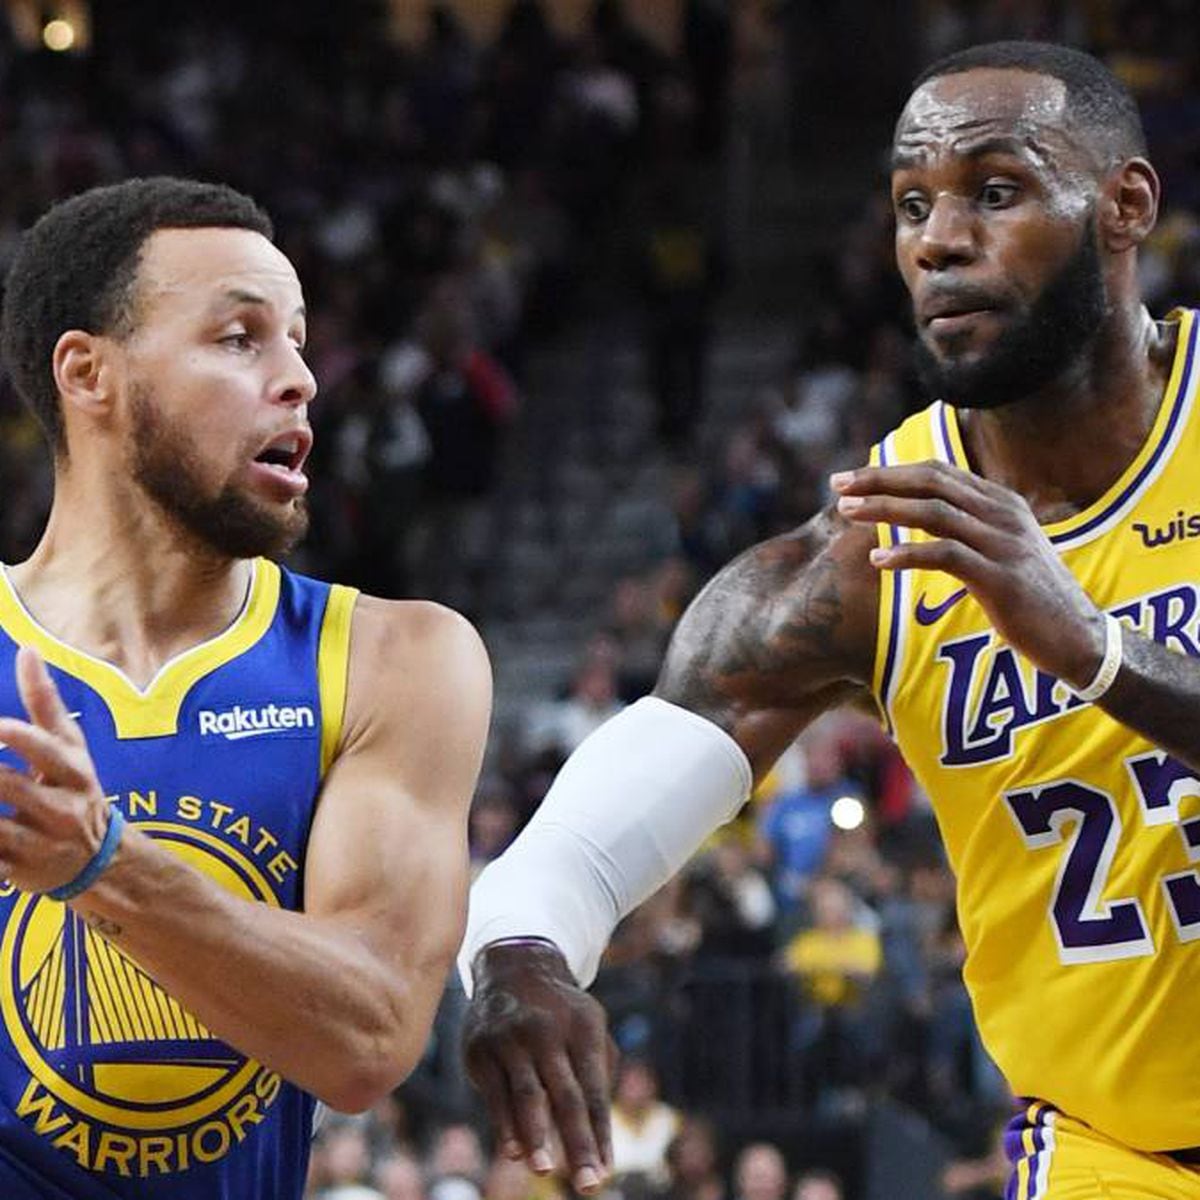 LeBron James and L.A. Lakers remain atop NBA's most popular jersey